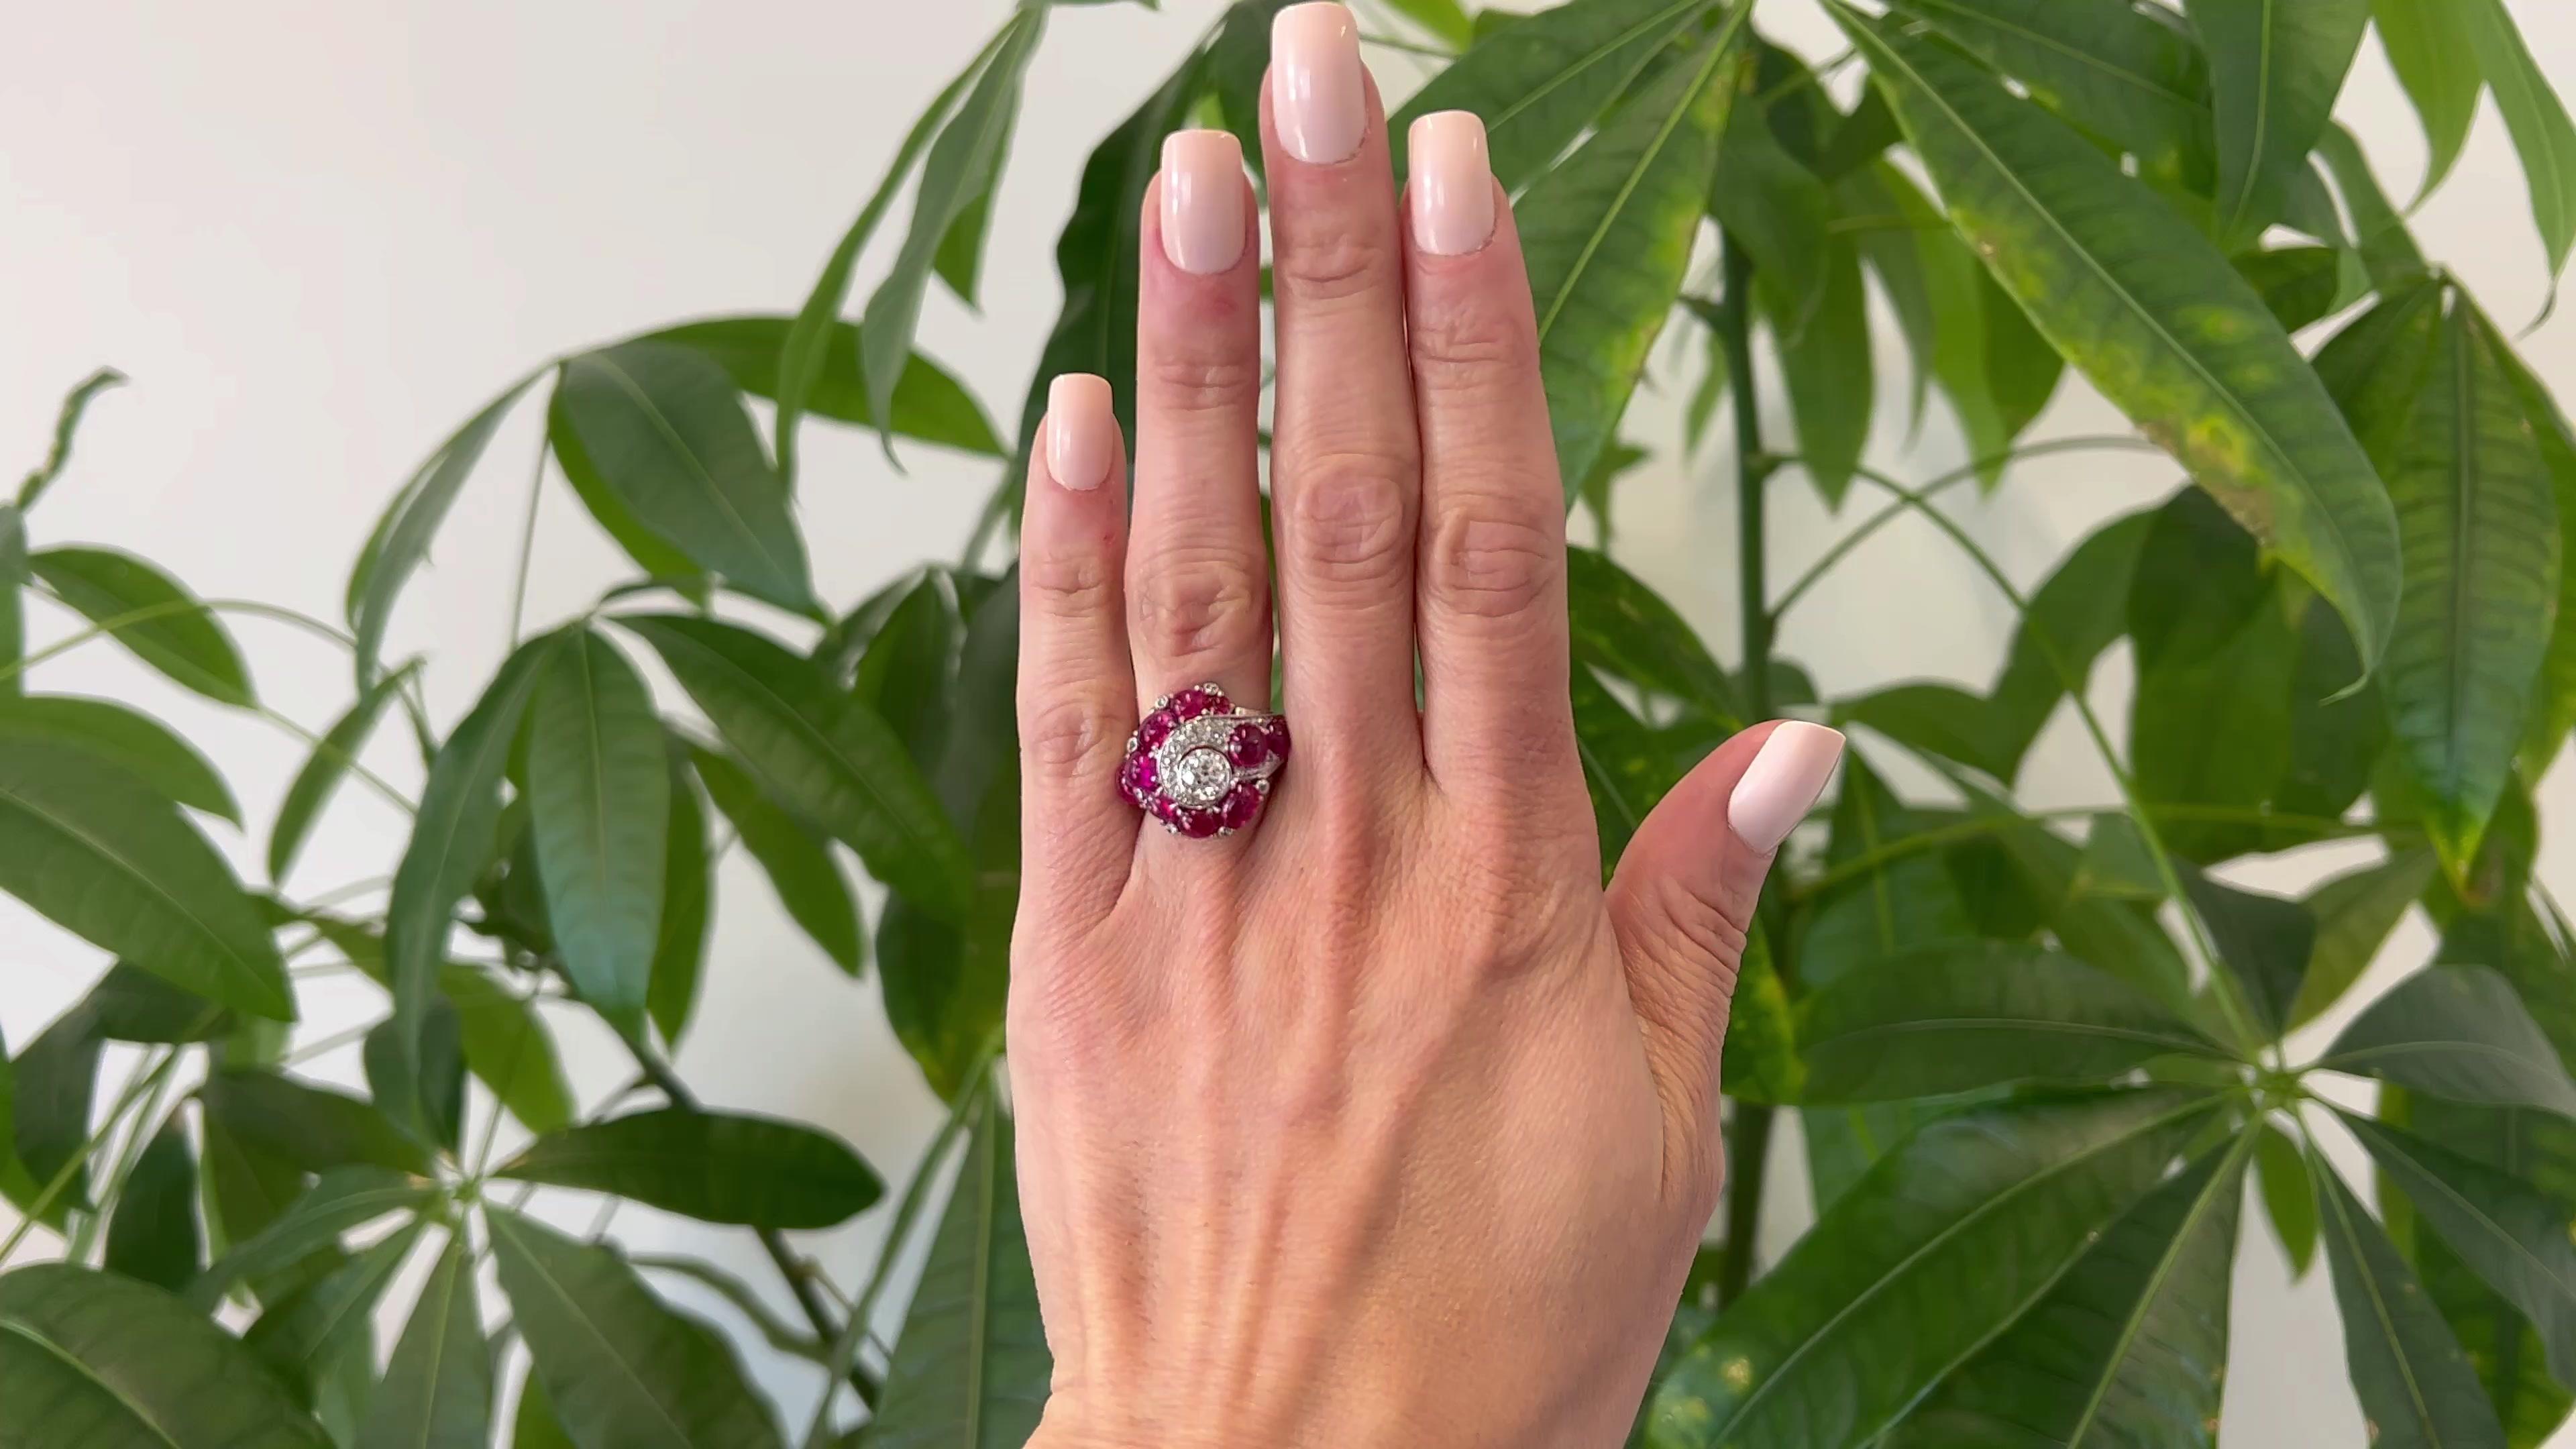 One Art Deco 7.75 Carat Total Weight Ruby and Diamond Platinum Ring. Featuring one old European cut diamond weighing approximately 0.75 carat, graded I color, VS1 clarity. Accented by 19 single and old European cut diamonds with a total weight of